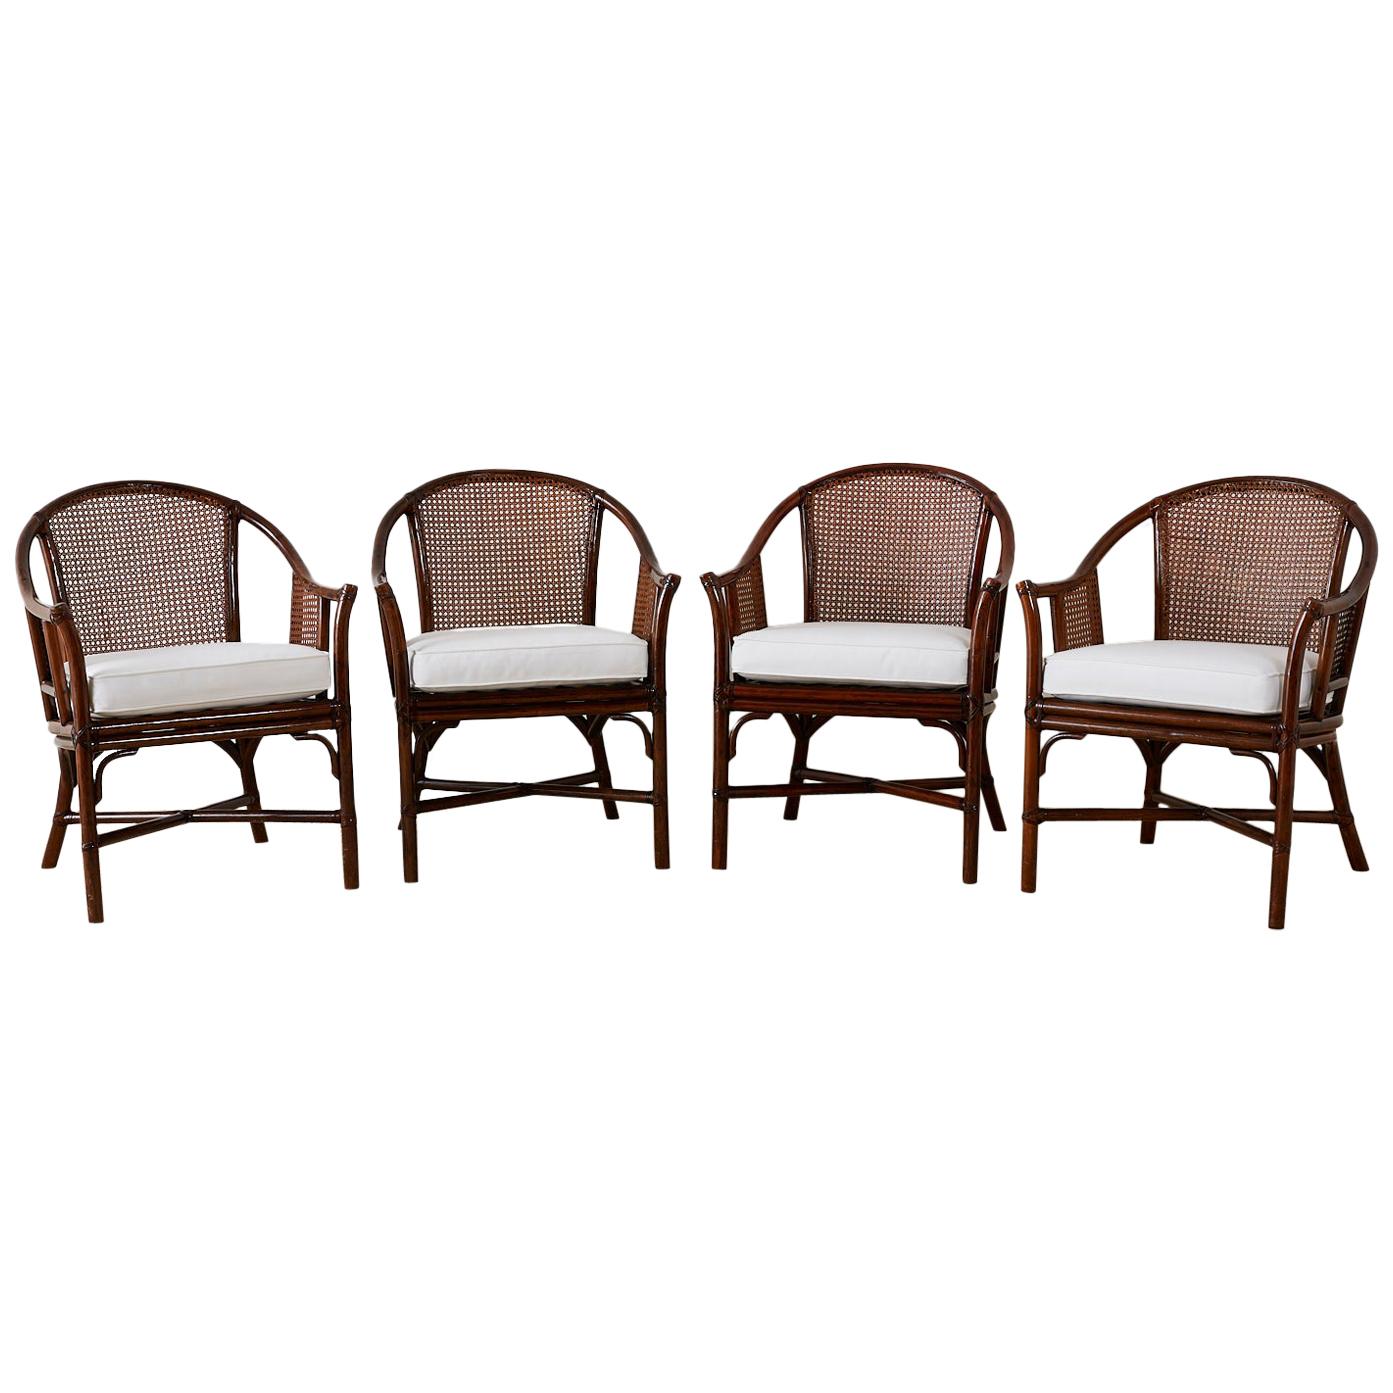 Set of Four McGuire Rattan Cane Horseshoe Lounge Chairs